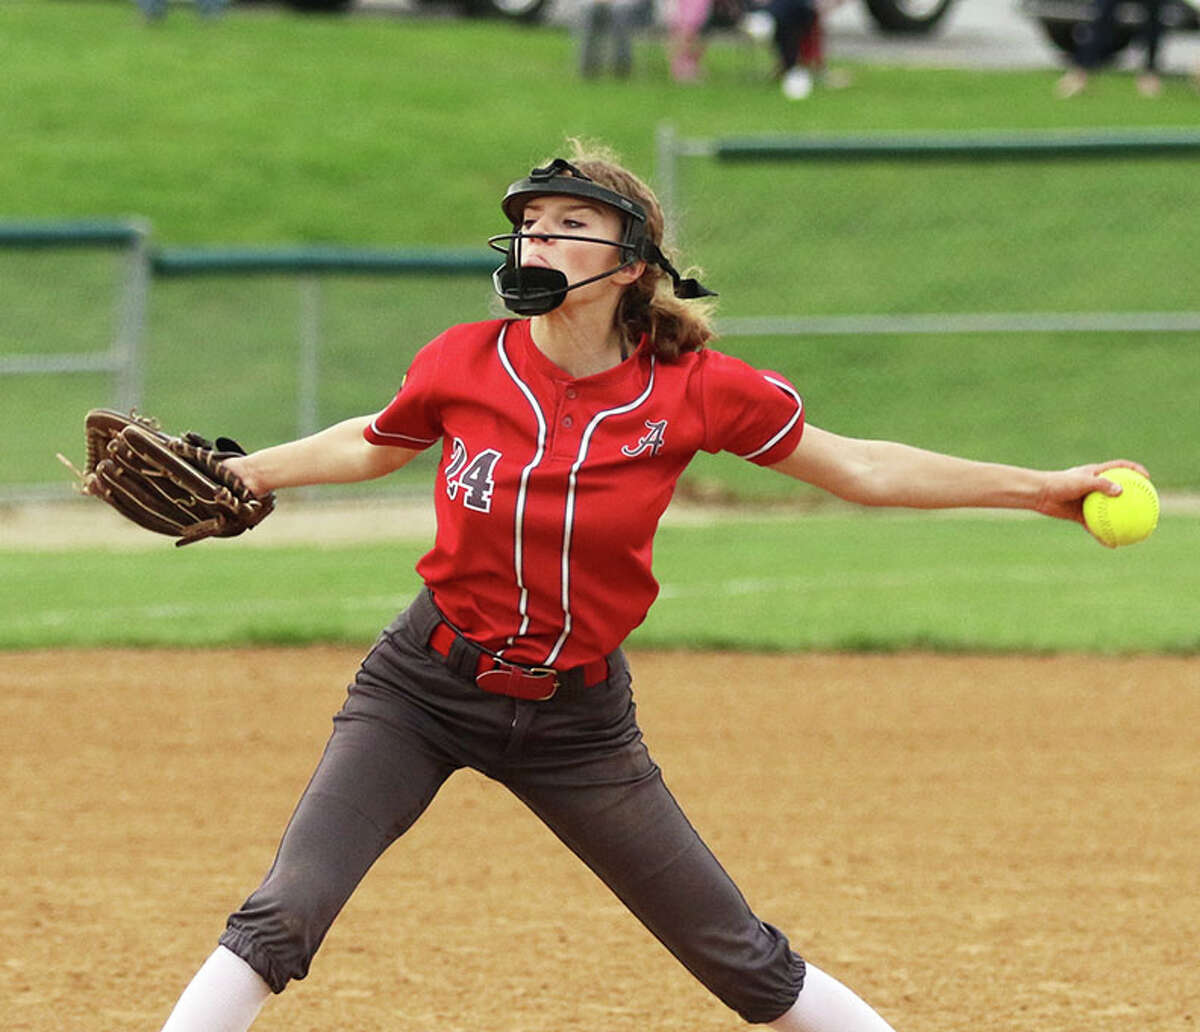 Alton's Grace Presley struck out nine and picked up the win over Collinsville in a SWC win Tuesday in Godfrey that gave the Redbirds six victories in their last seven games.